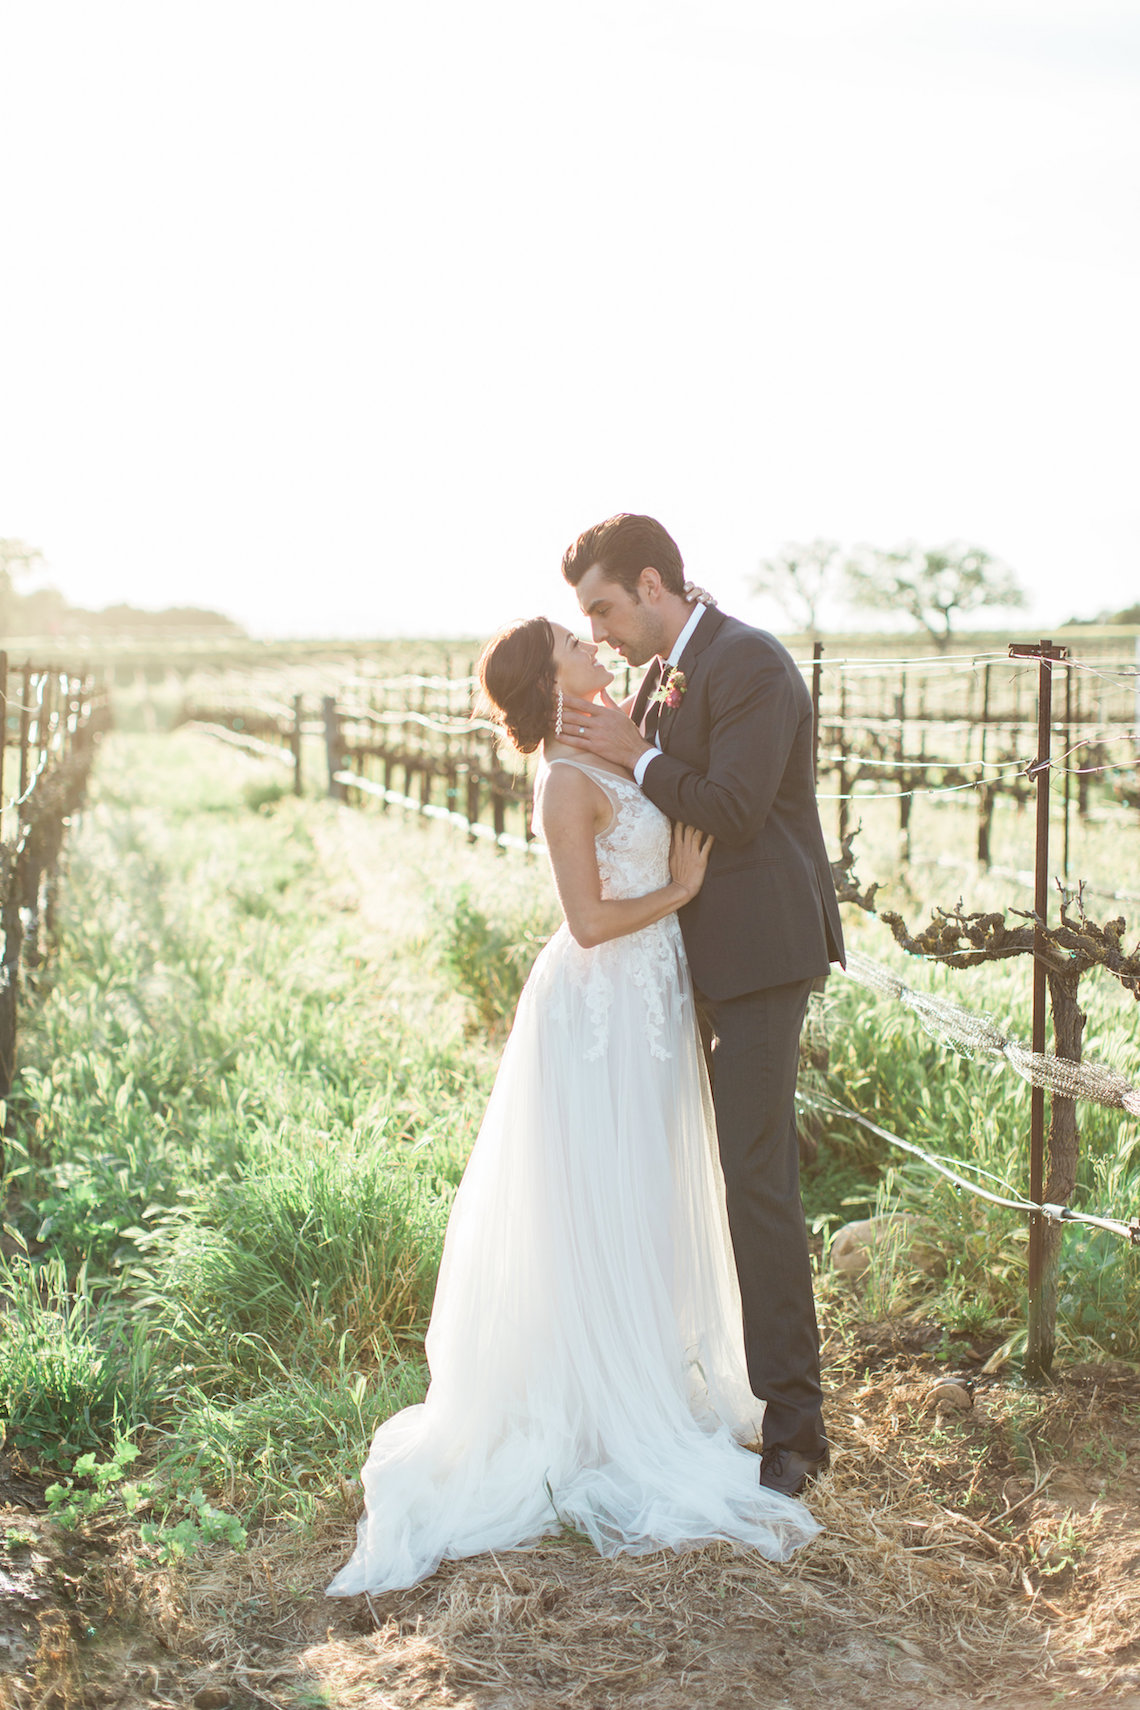 Romantic Gold, Grey and Berry Vineyard Wedding Inspiration | Jenny Quicksall & An Enlightened Event 61